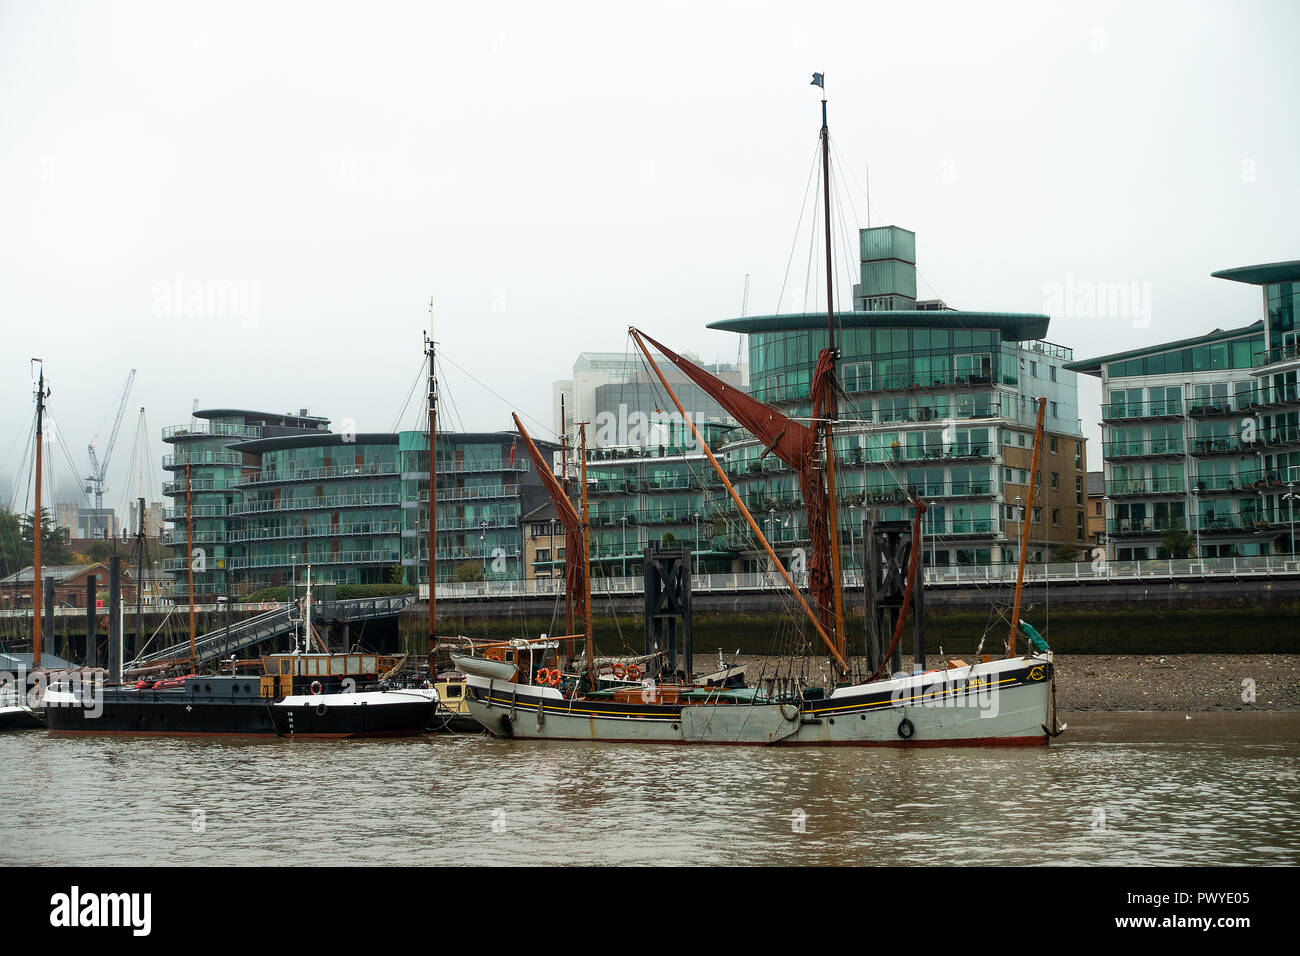 The Old Thames Barge Will Moored at The Hermitage Community Moorings on River Thames with Luxury Riverside Apartments London England UK Stock Photo